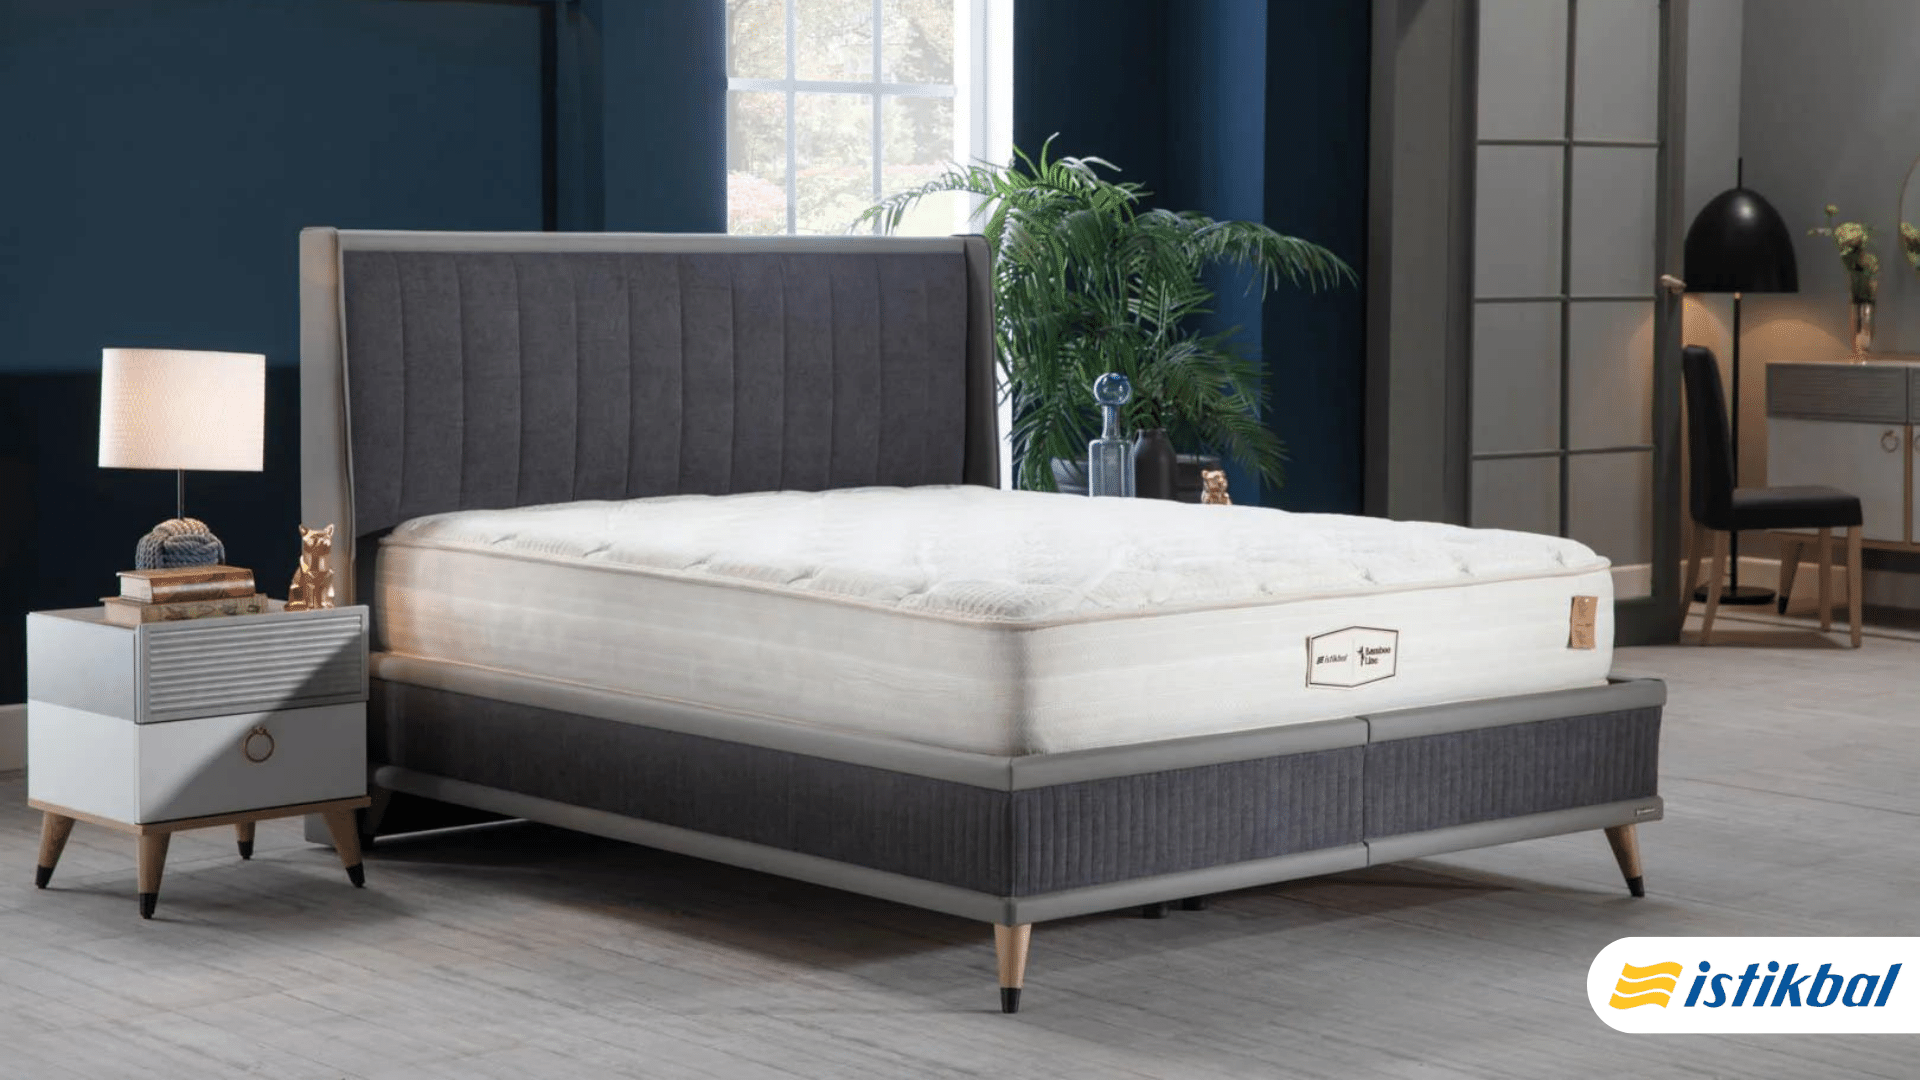 The Art of Sleep: Why Istikbal UK's Beds Are a Game-Changer